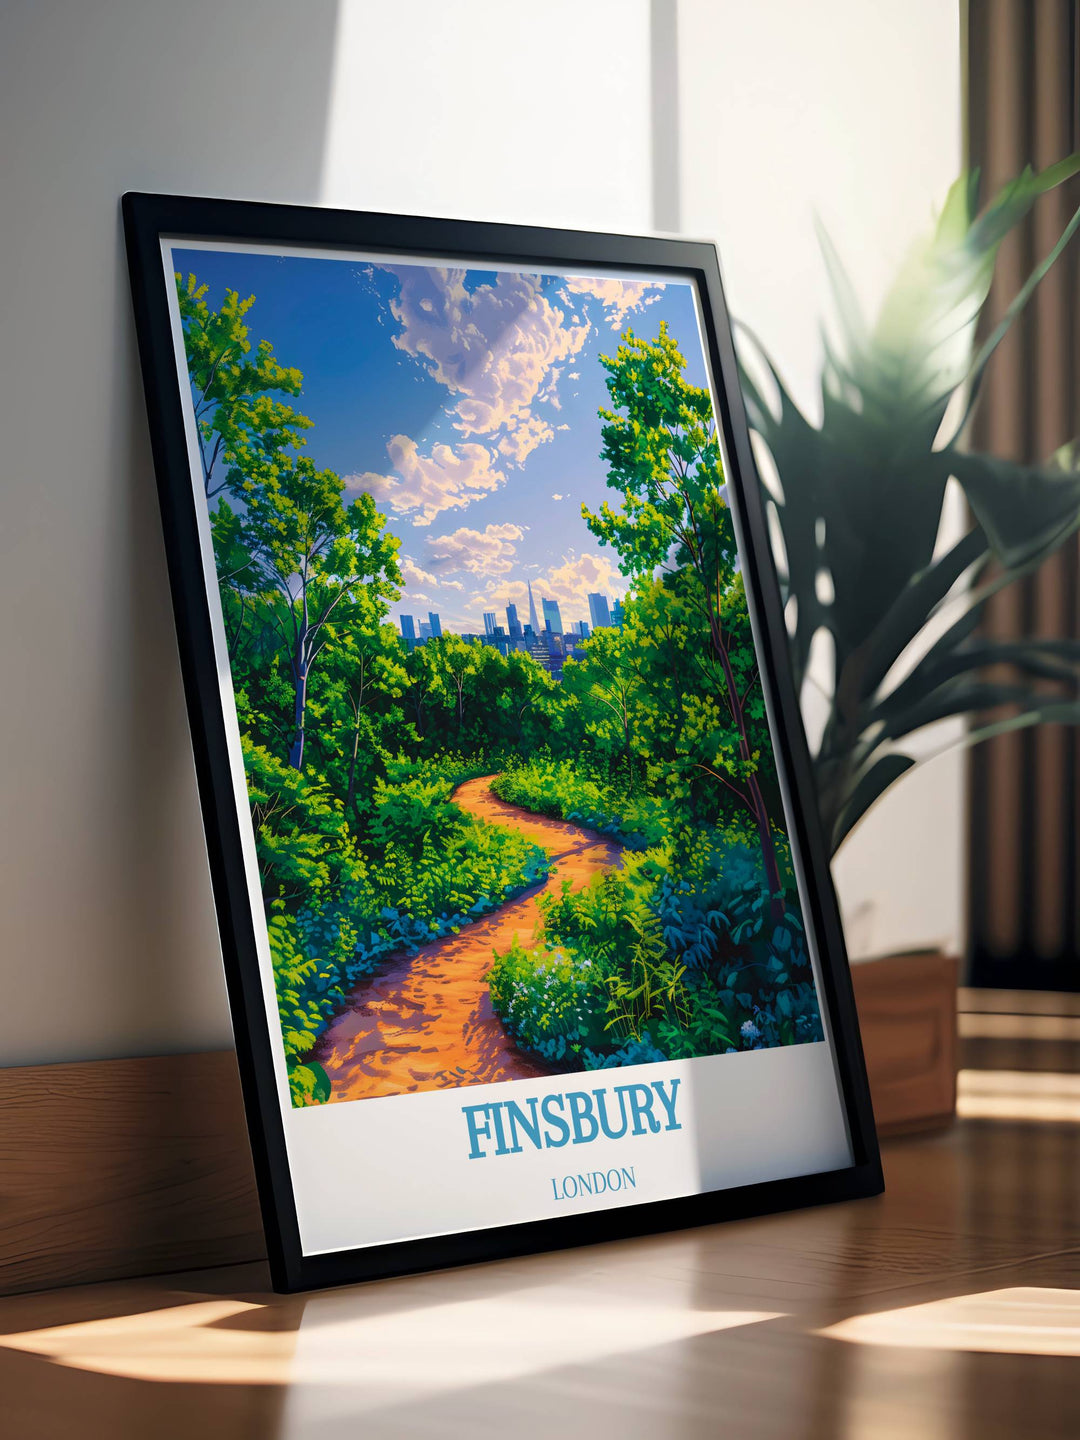 Transform your home decor with this Finsbury Park artwork. This print captures the lush greenery and serene atmosphere of the park, making it a perfect addition to any art collection and a beautiful piece of home decor.